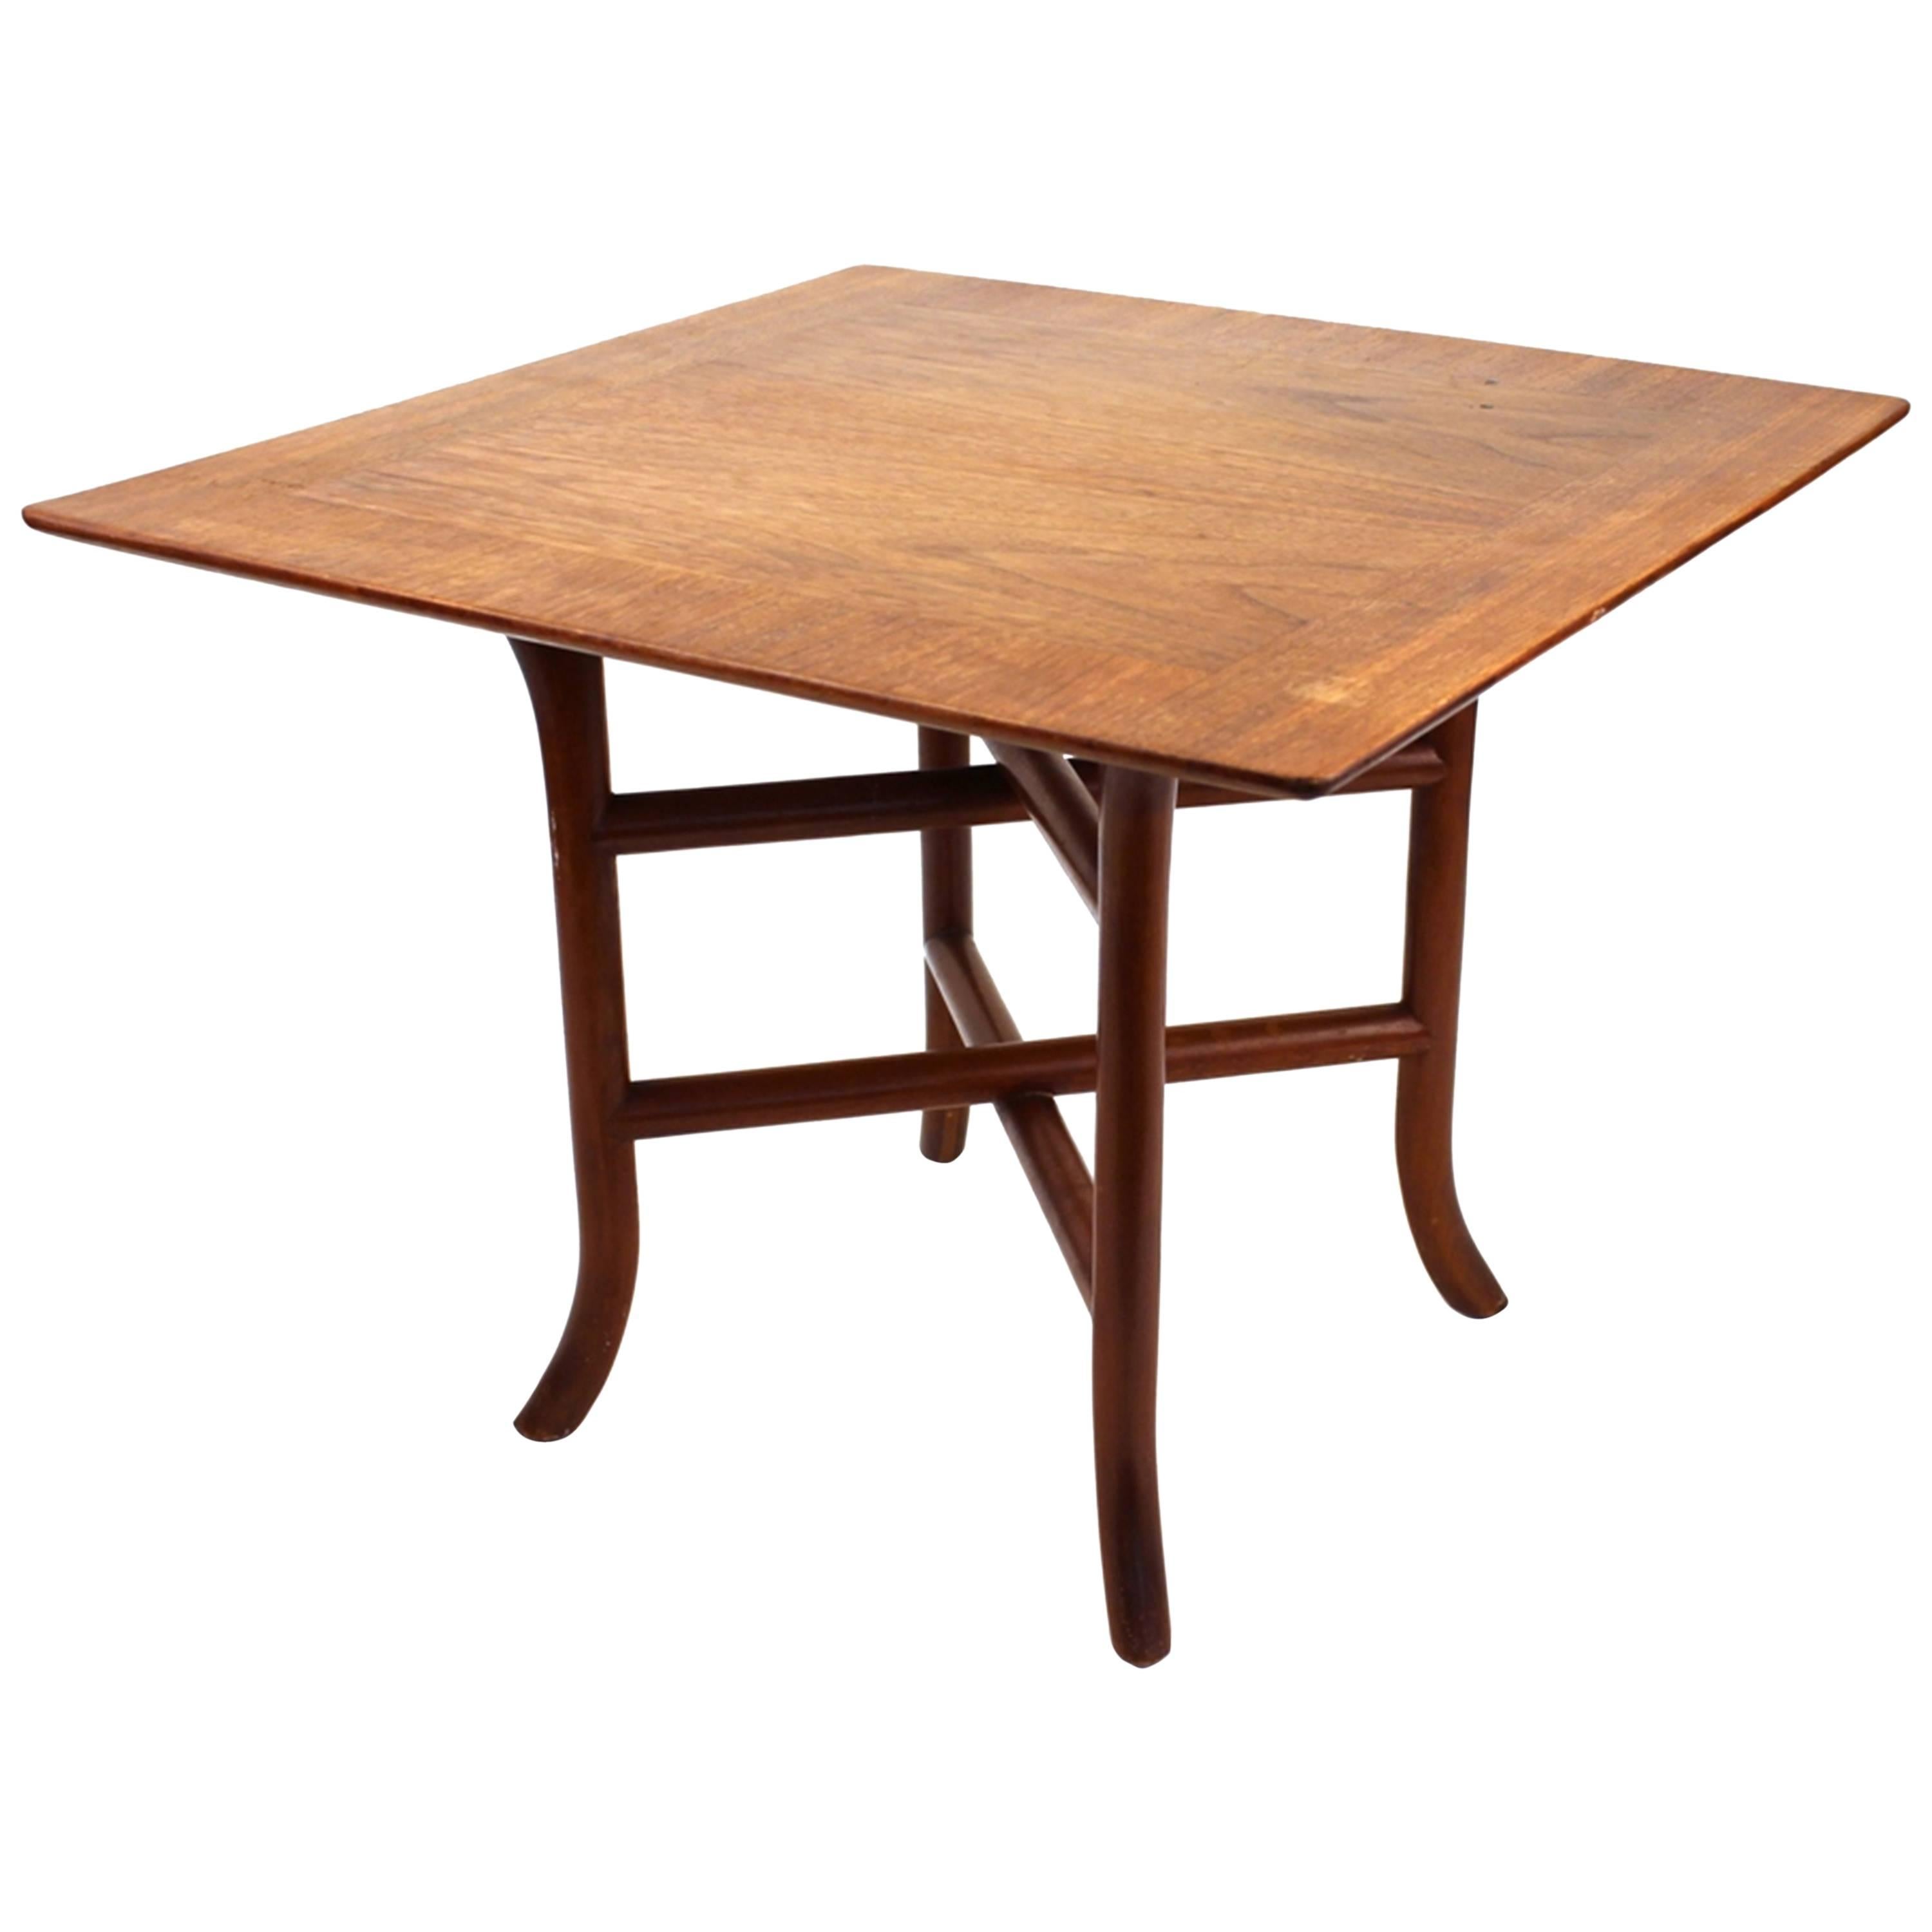 Robsjohn-Gibbings for Widdicomb Side Table with Square Top and Crossed Trestle